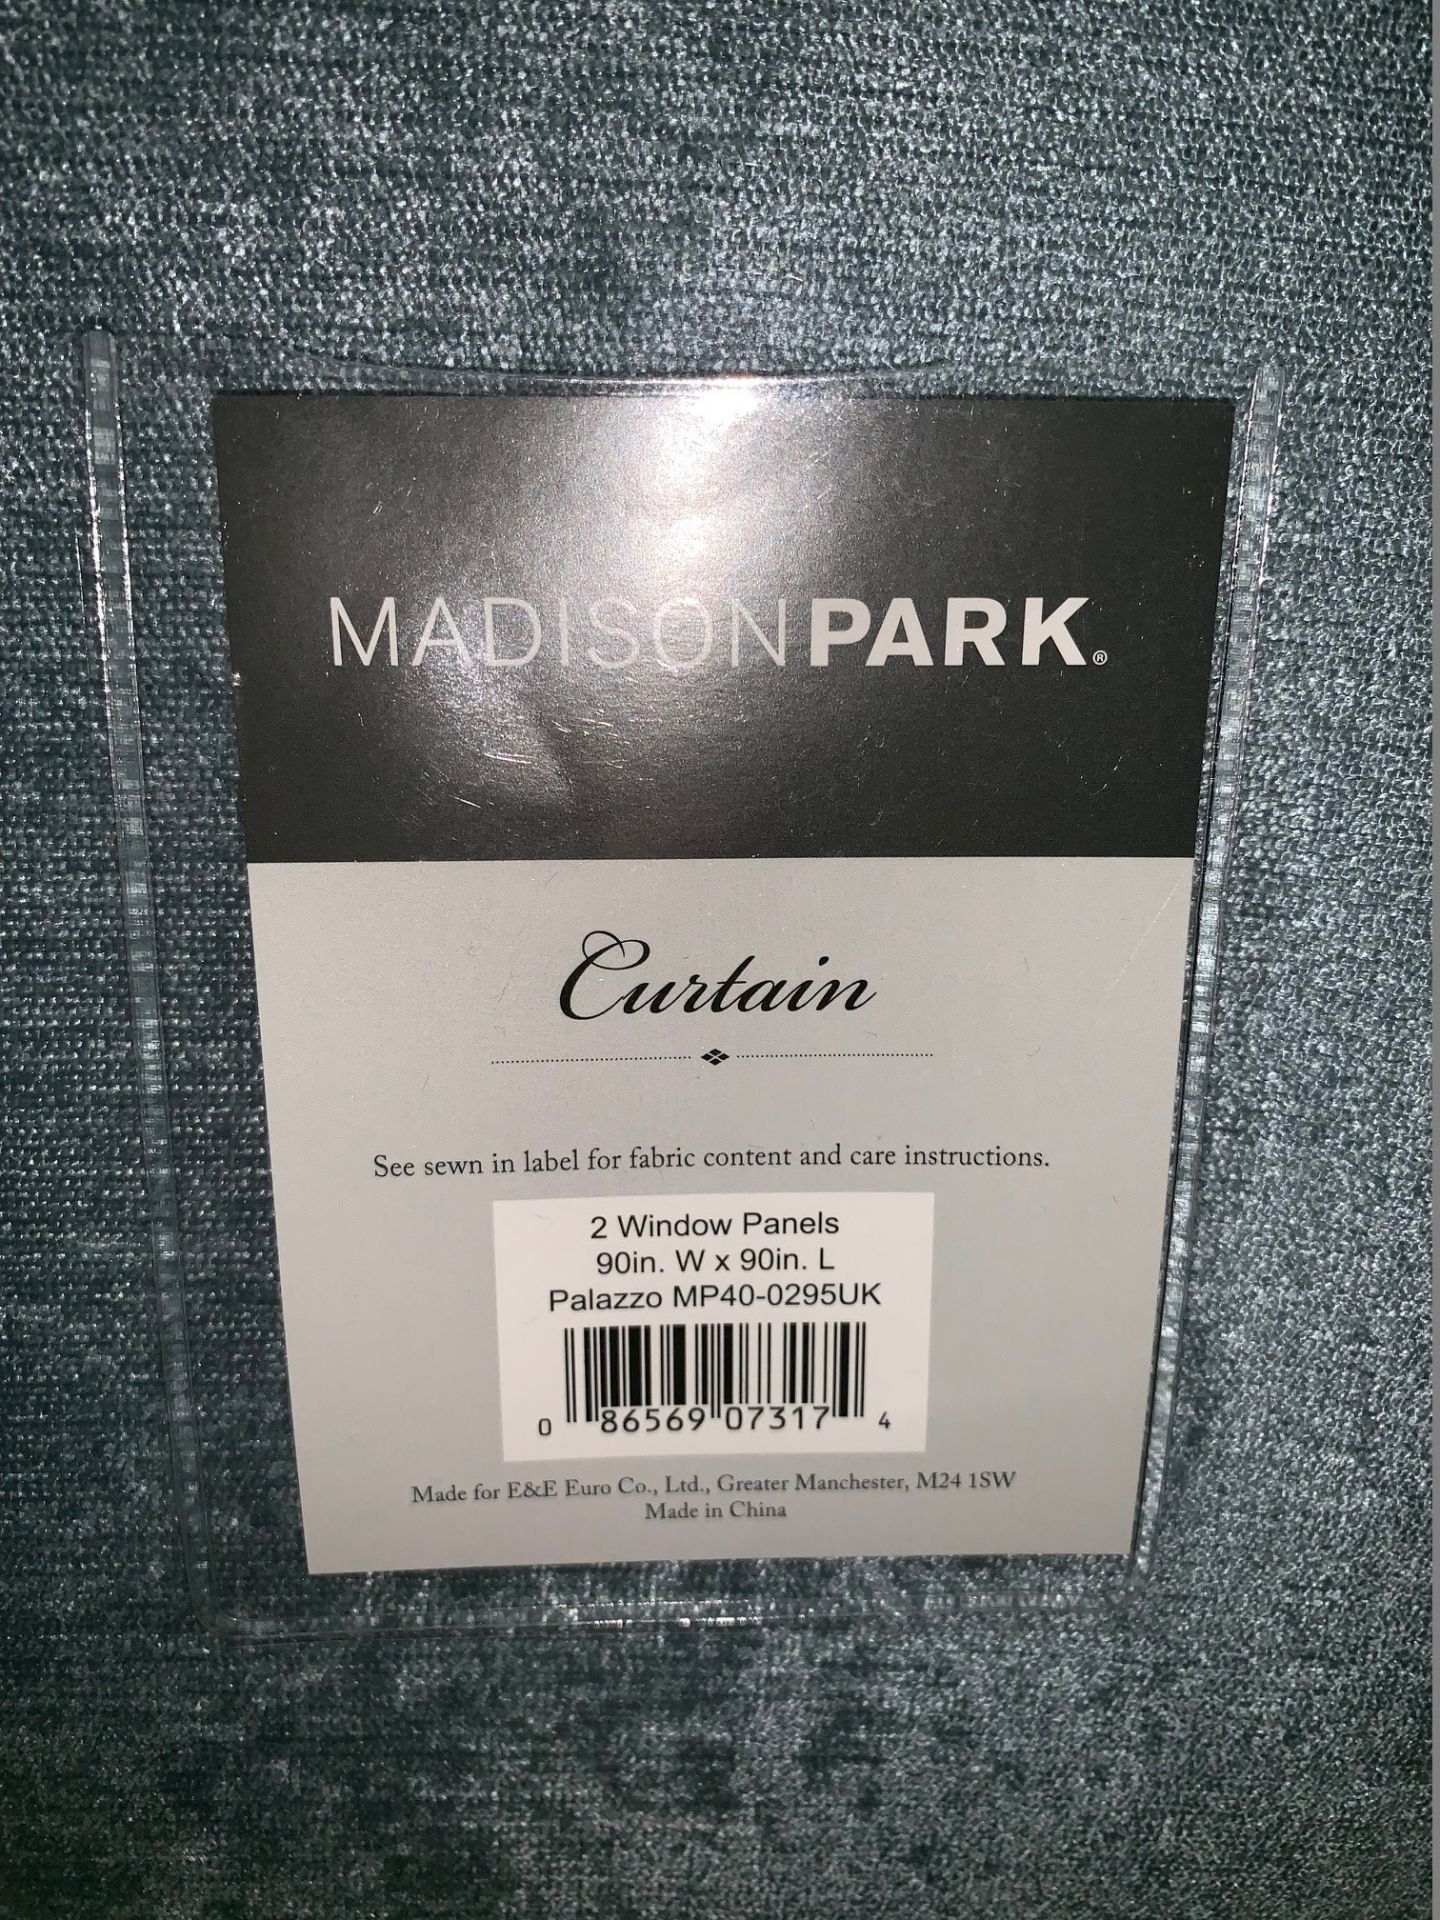 1 x Set of Madison Park Palazzo Chenille Blue Curtains 90x90" - Product Code MP40-0295UK (Brand - Image 3 of 3